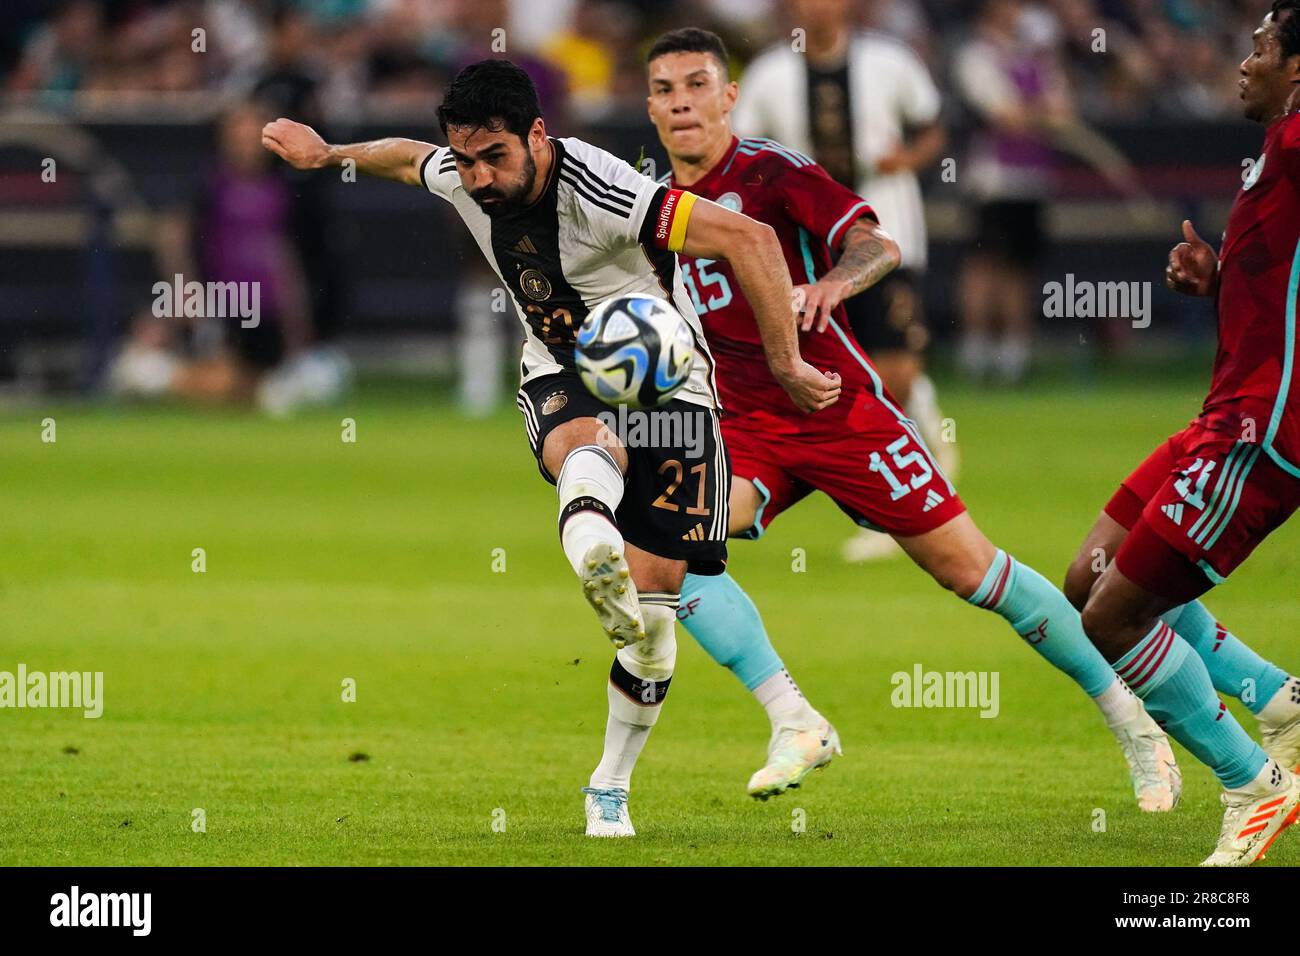 Gelsenkirchen, Germany. 20th June, 2023. GELSENKIRCHEN, GERMANY - JUNE 20: Ilkay Gundogan of Germany battle for possession with Mateus Uribe of Colombia during the International Friendly match between Germany and Colombia at the Veltins-Arena on June 20, 2023 in Gelsenkirchen, Germany (Photo by Joris Verwijst/Orange Pictures) Credit: Orange Pics BV/Alamy Live News Stock Photo